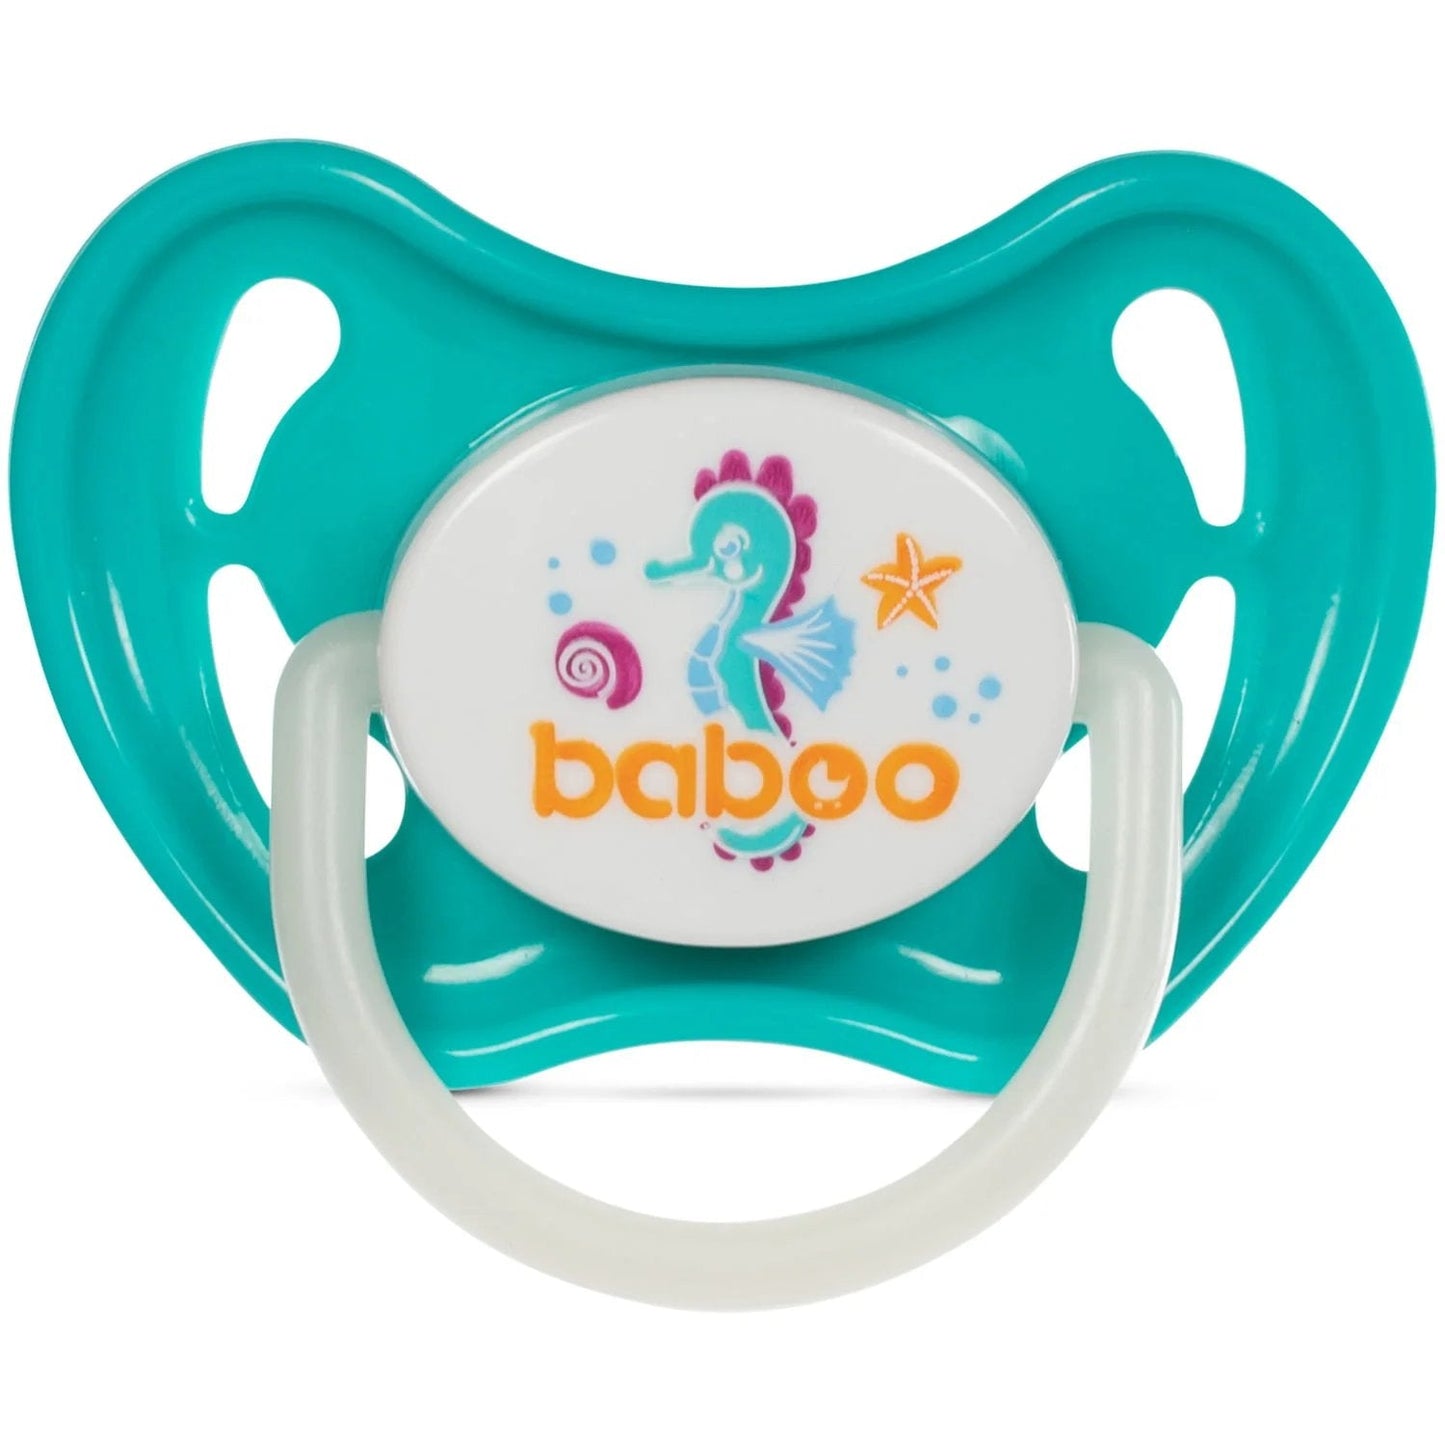 Baboo Soother Silicone Pacifier, Sealife Glow in the Dark, suitable for 0+ months